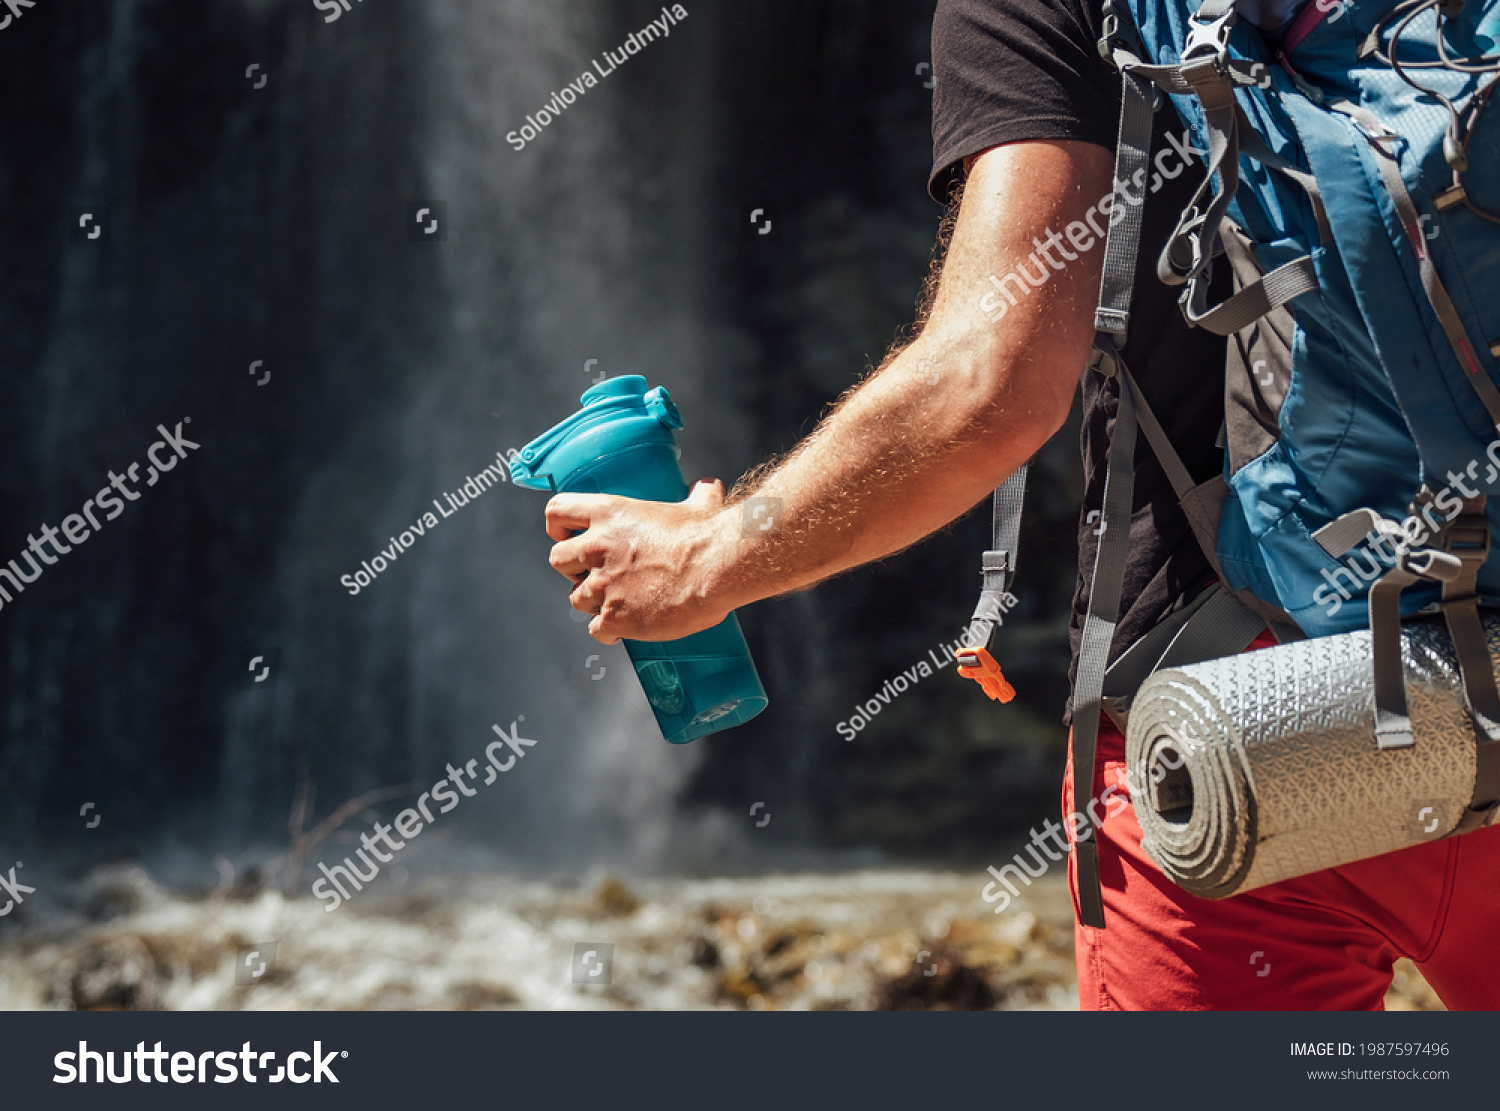 Hand close up with drinking water bottle. Man with backpack dressed in active trekking clothes touristic staying near mountain river waterfall and enjoying Nature. Traveling, trekking concept image #1987597496